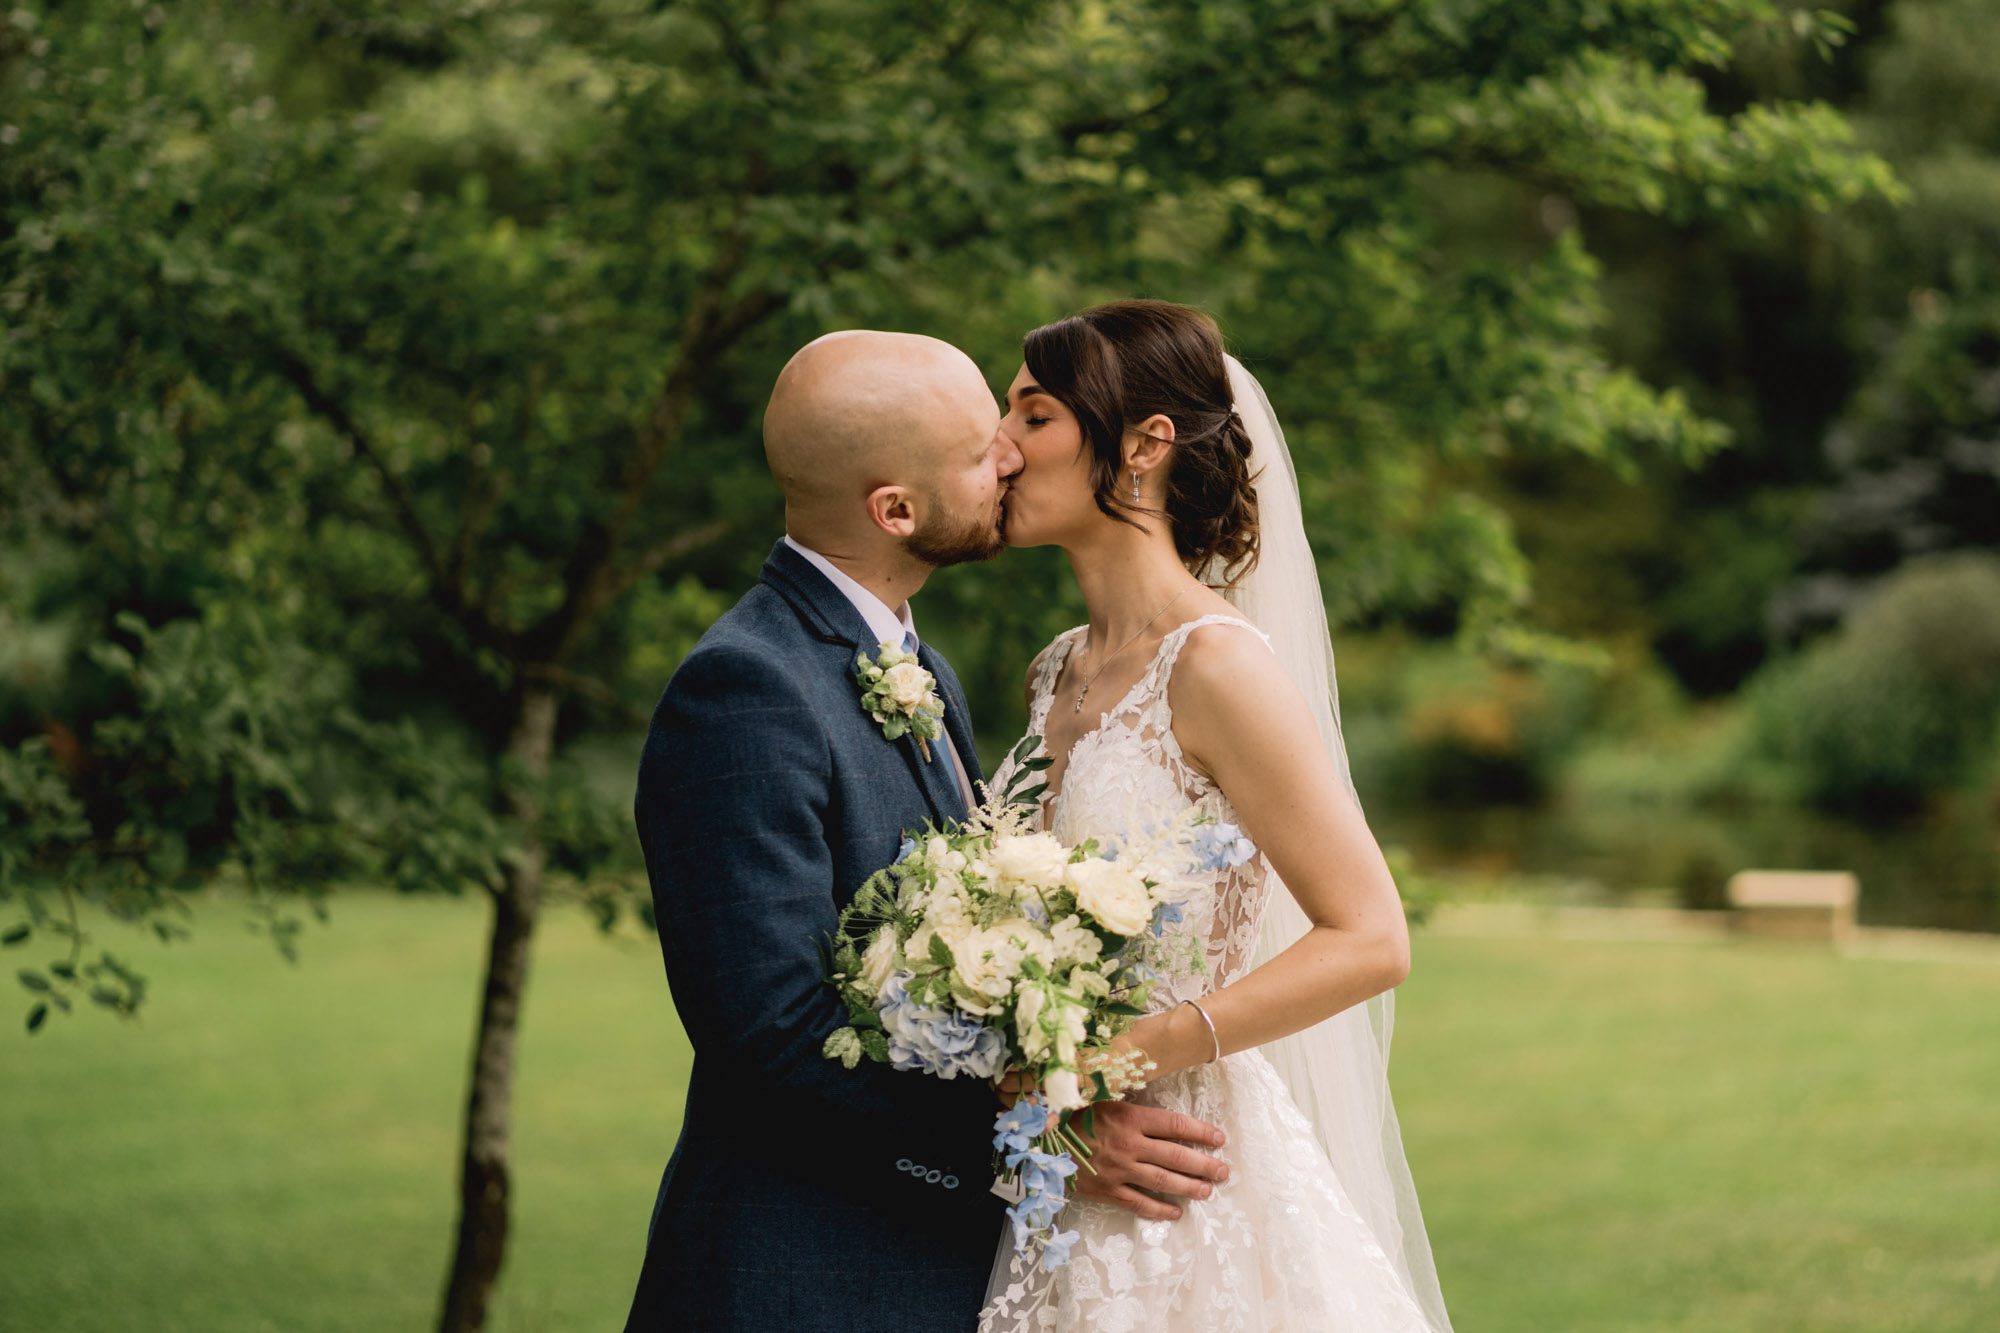 Bride and groom kiss on their wedding day at Rivervale Barn in Hampshire.